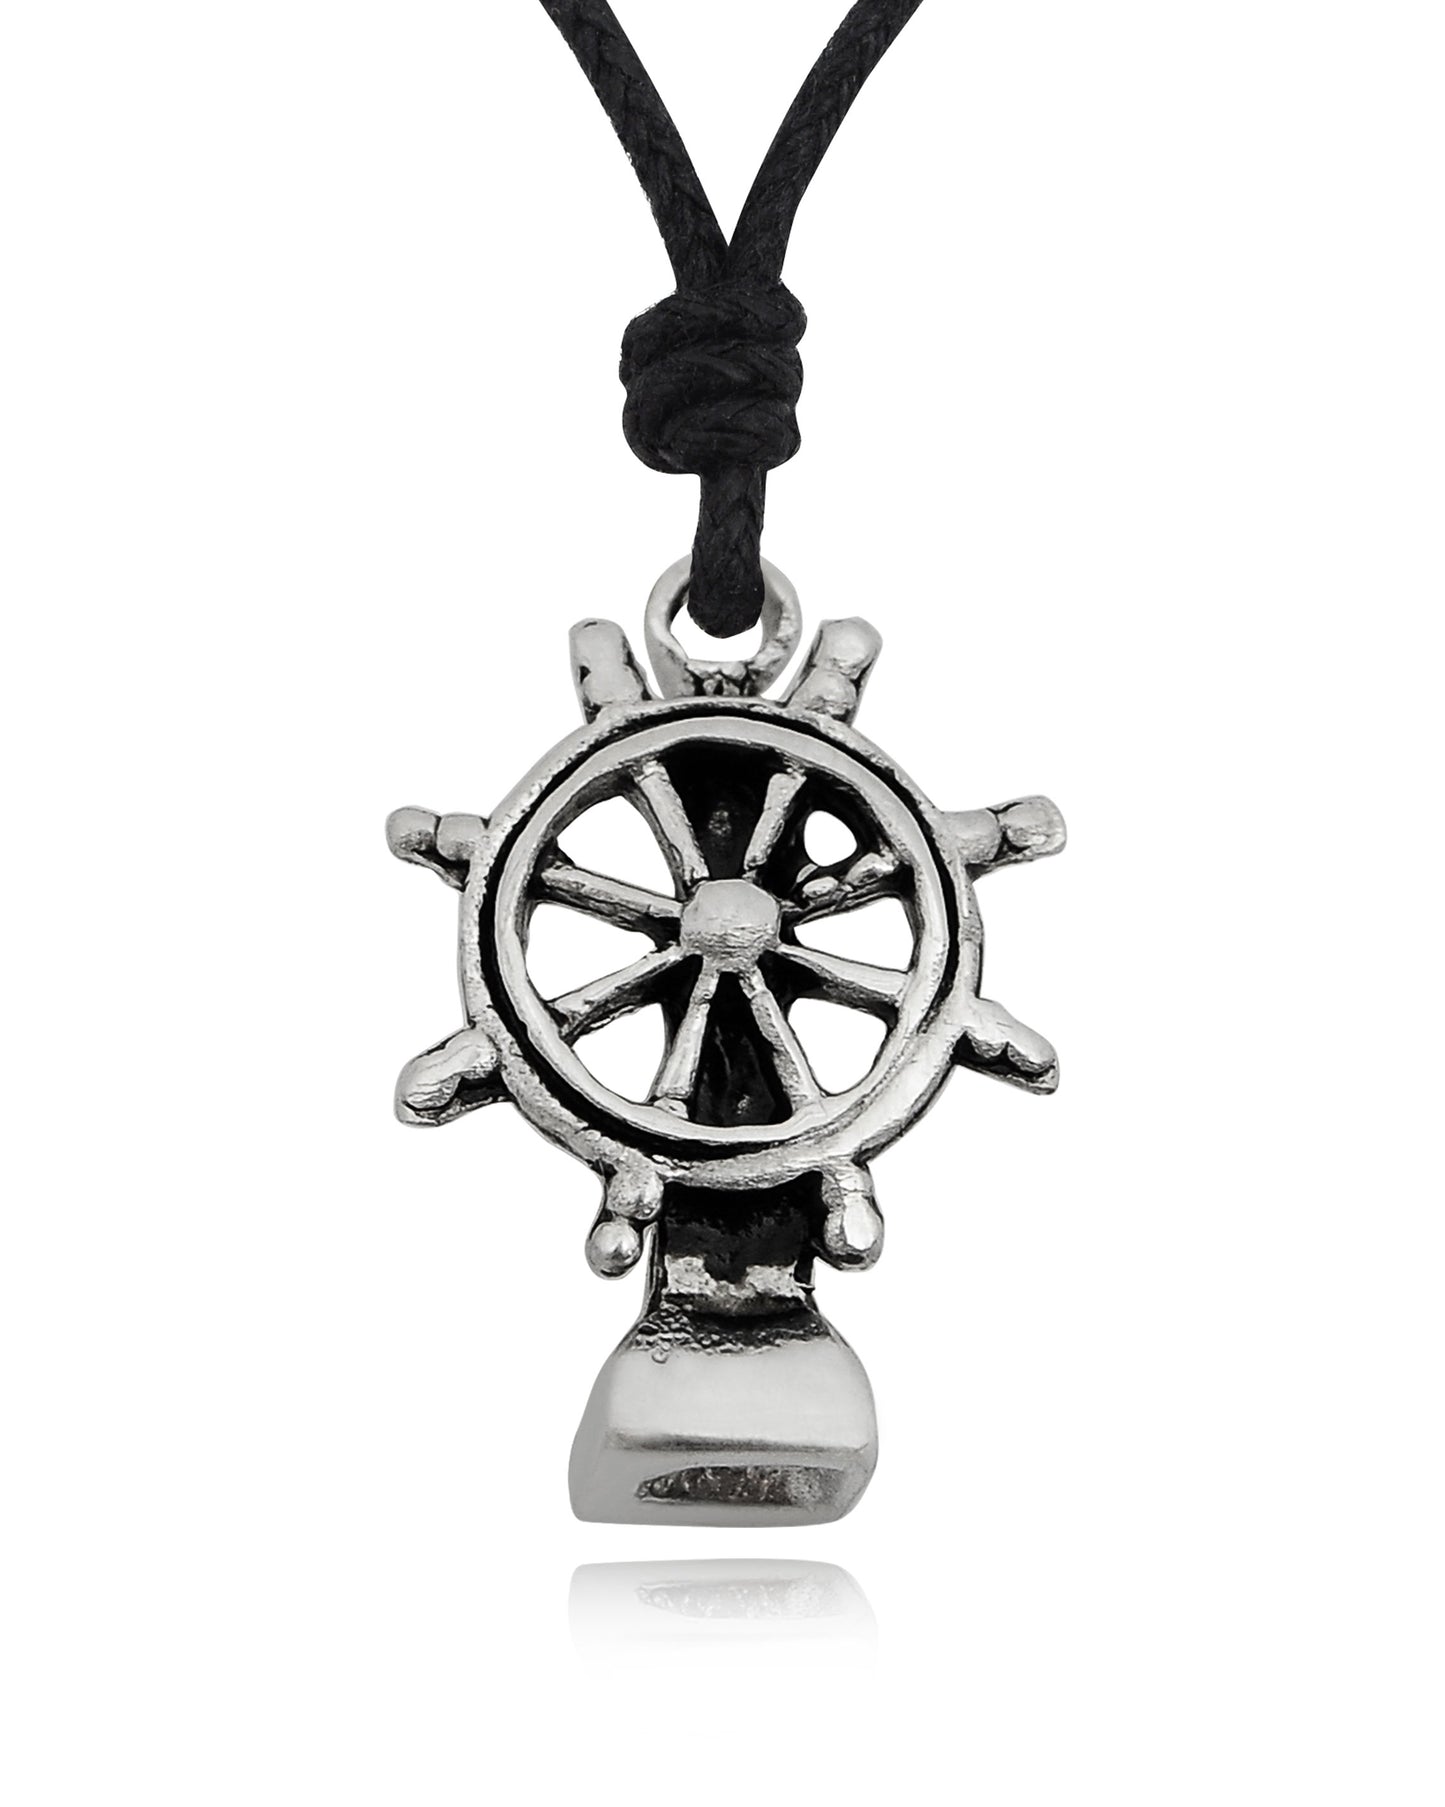 New Ship's Steering Wheel Silver Pewter Charm Necklace Pendant Jewelry With Cotton Cord